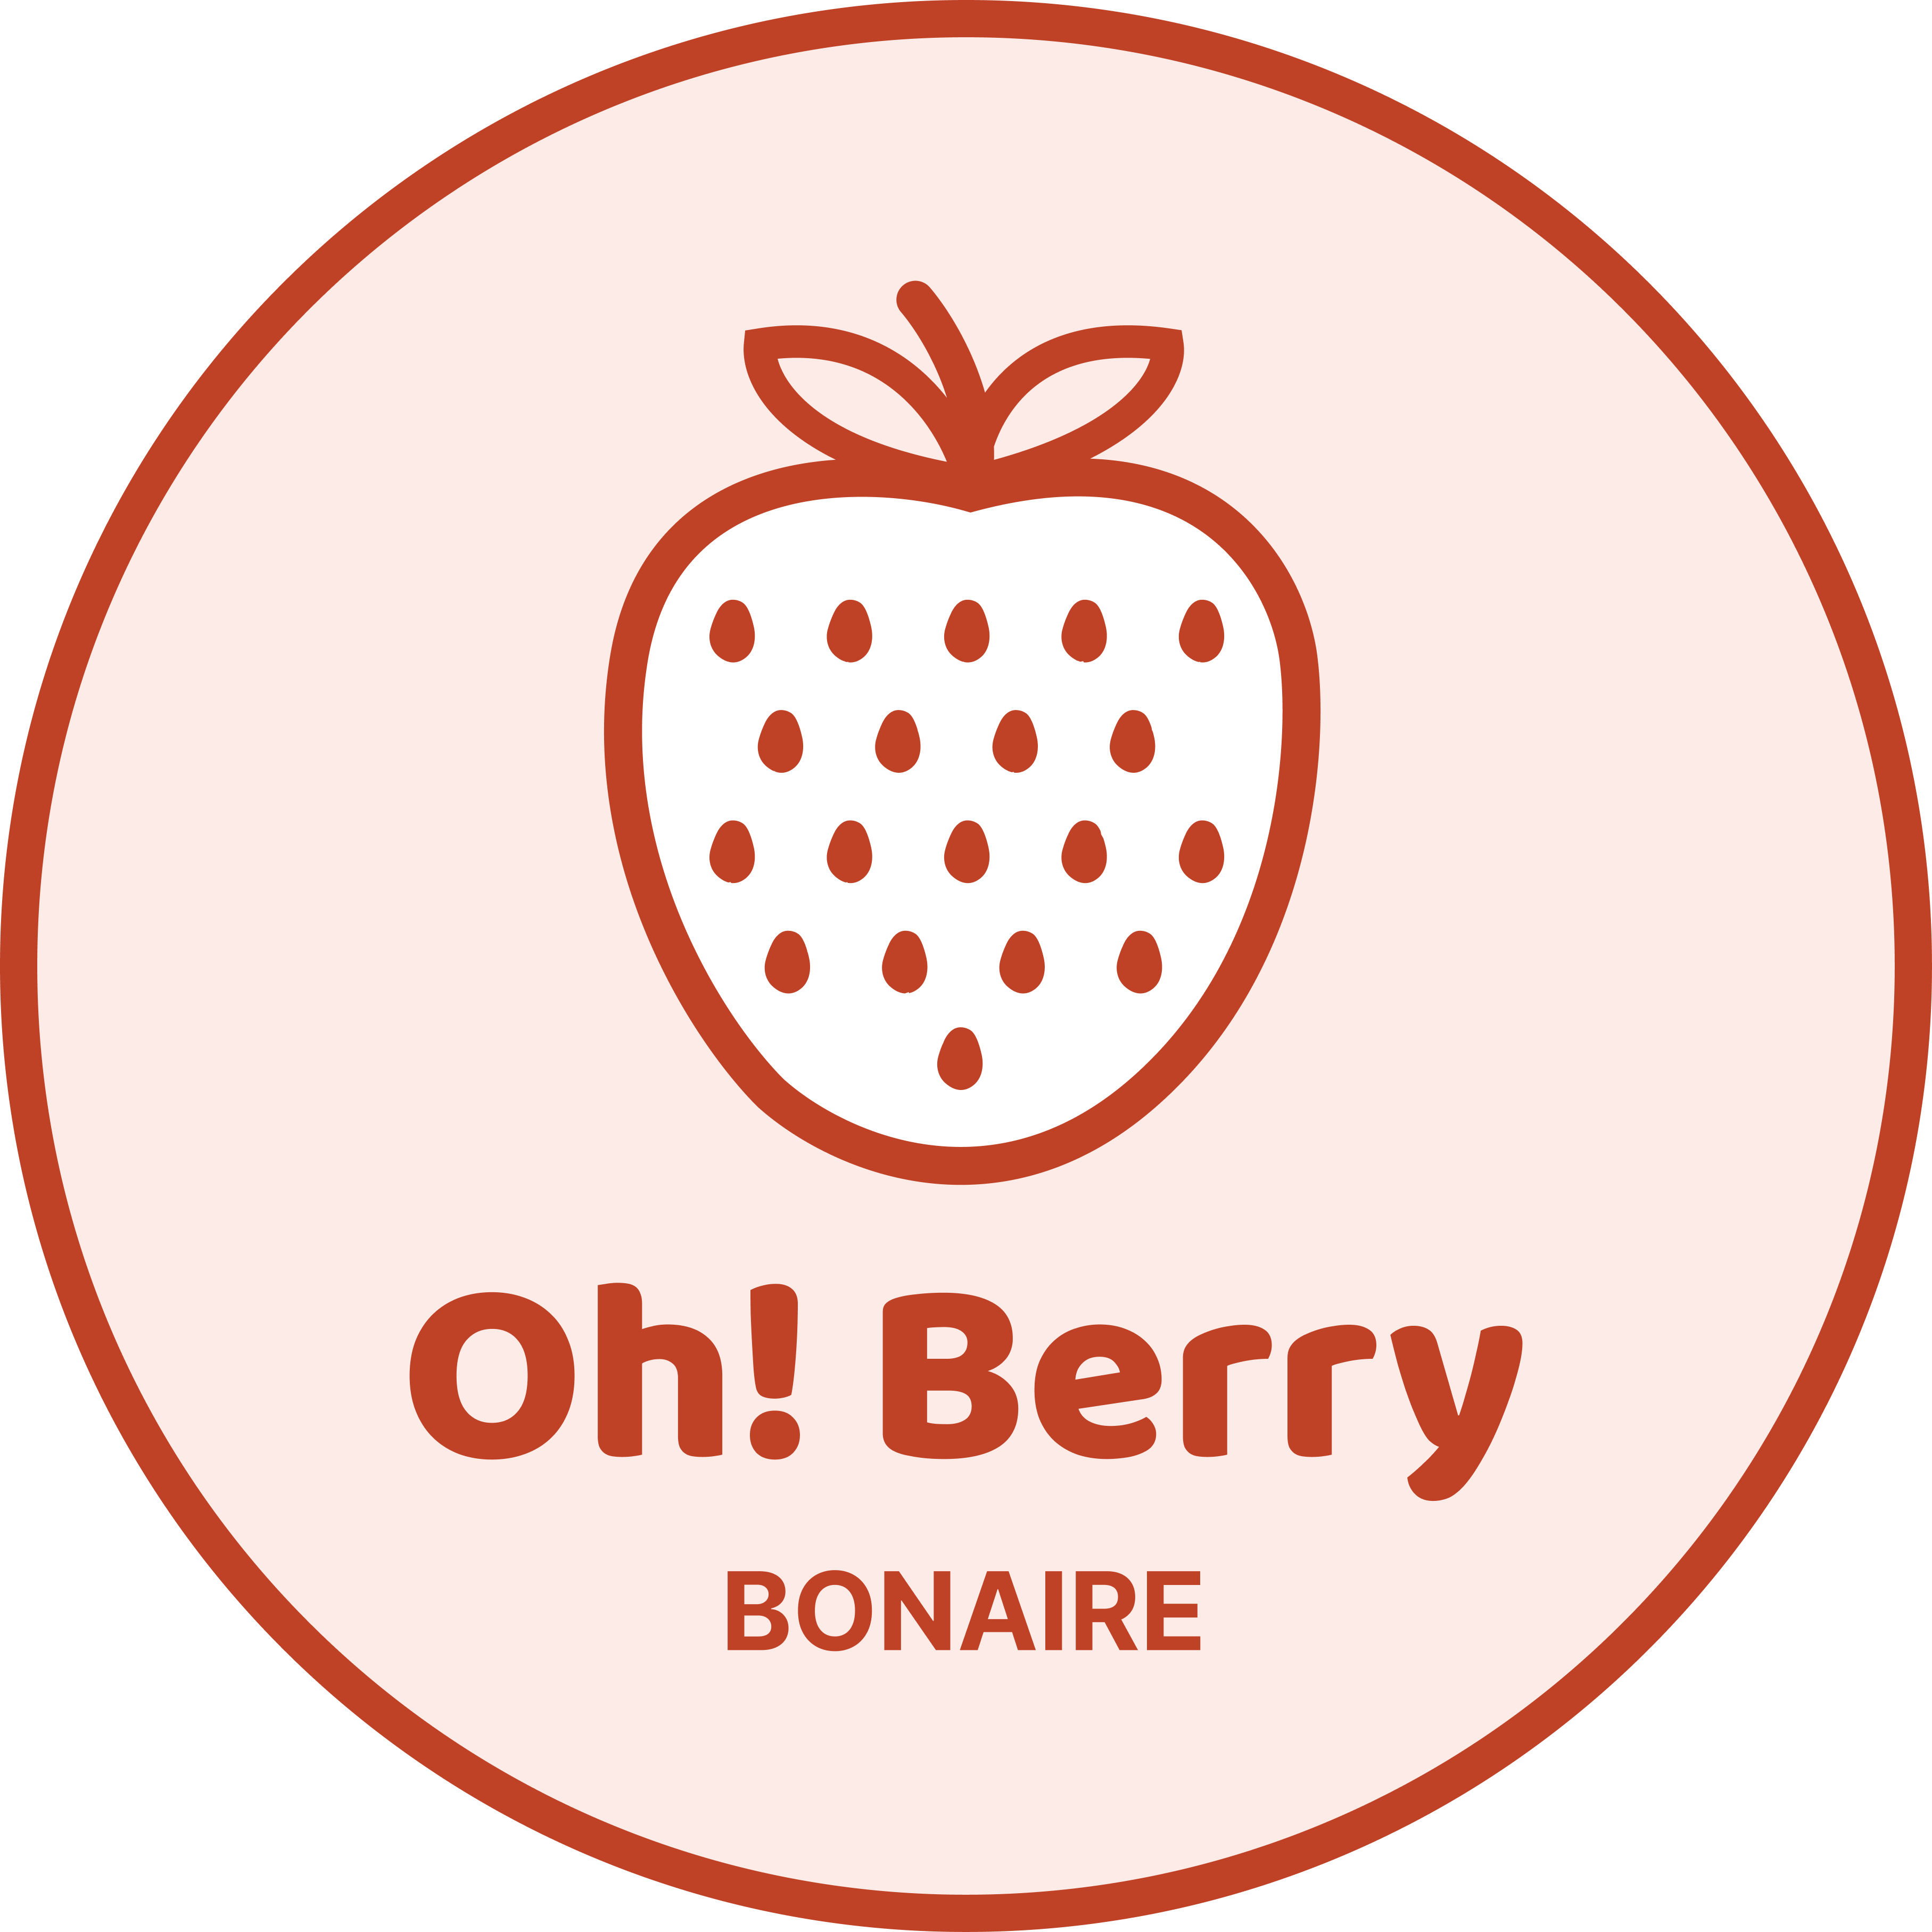 Oh! Berry